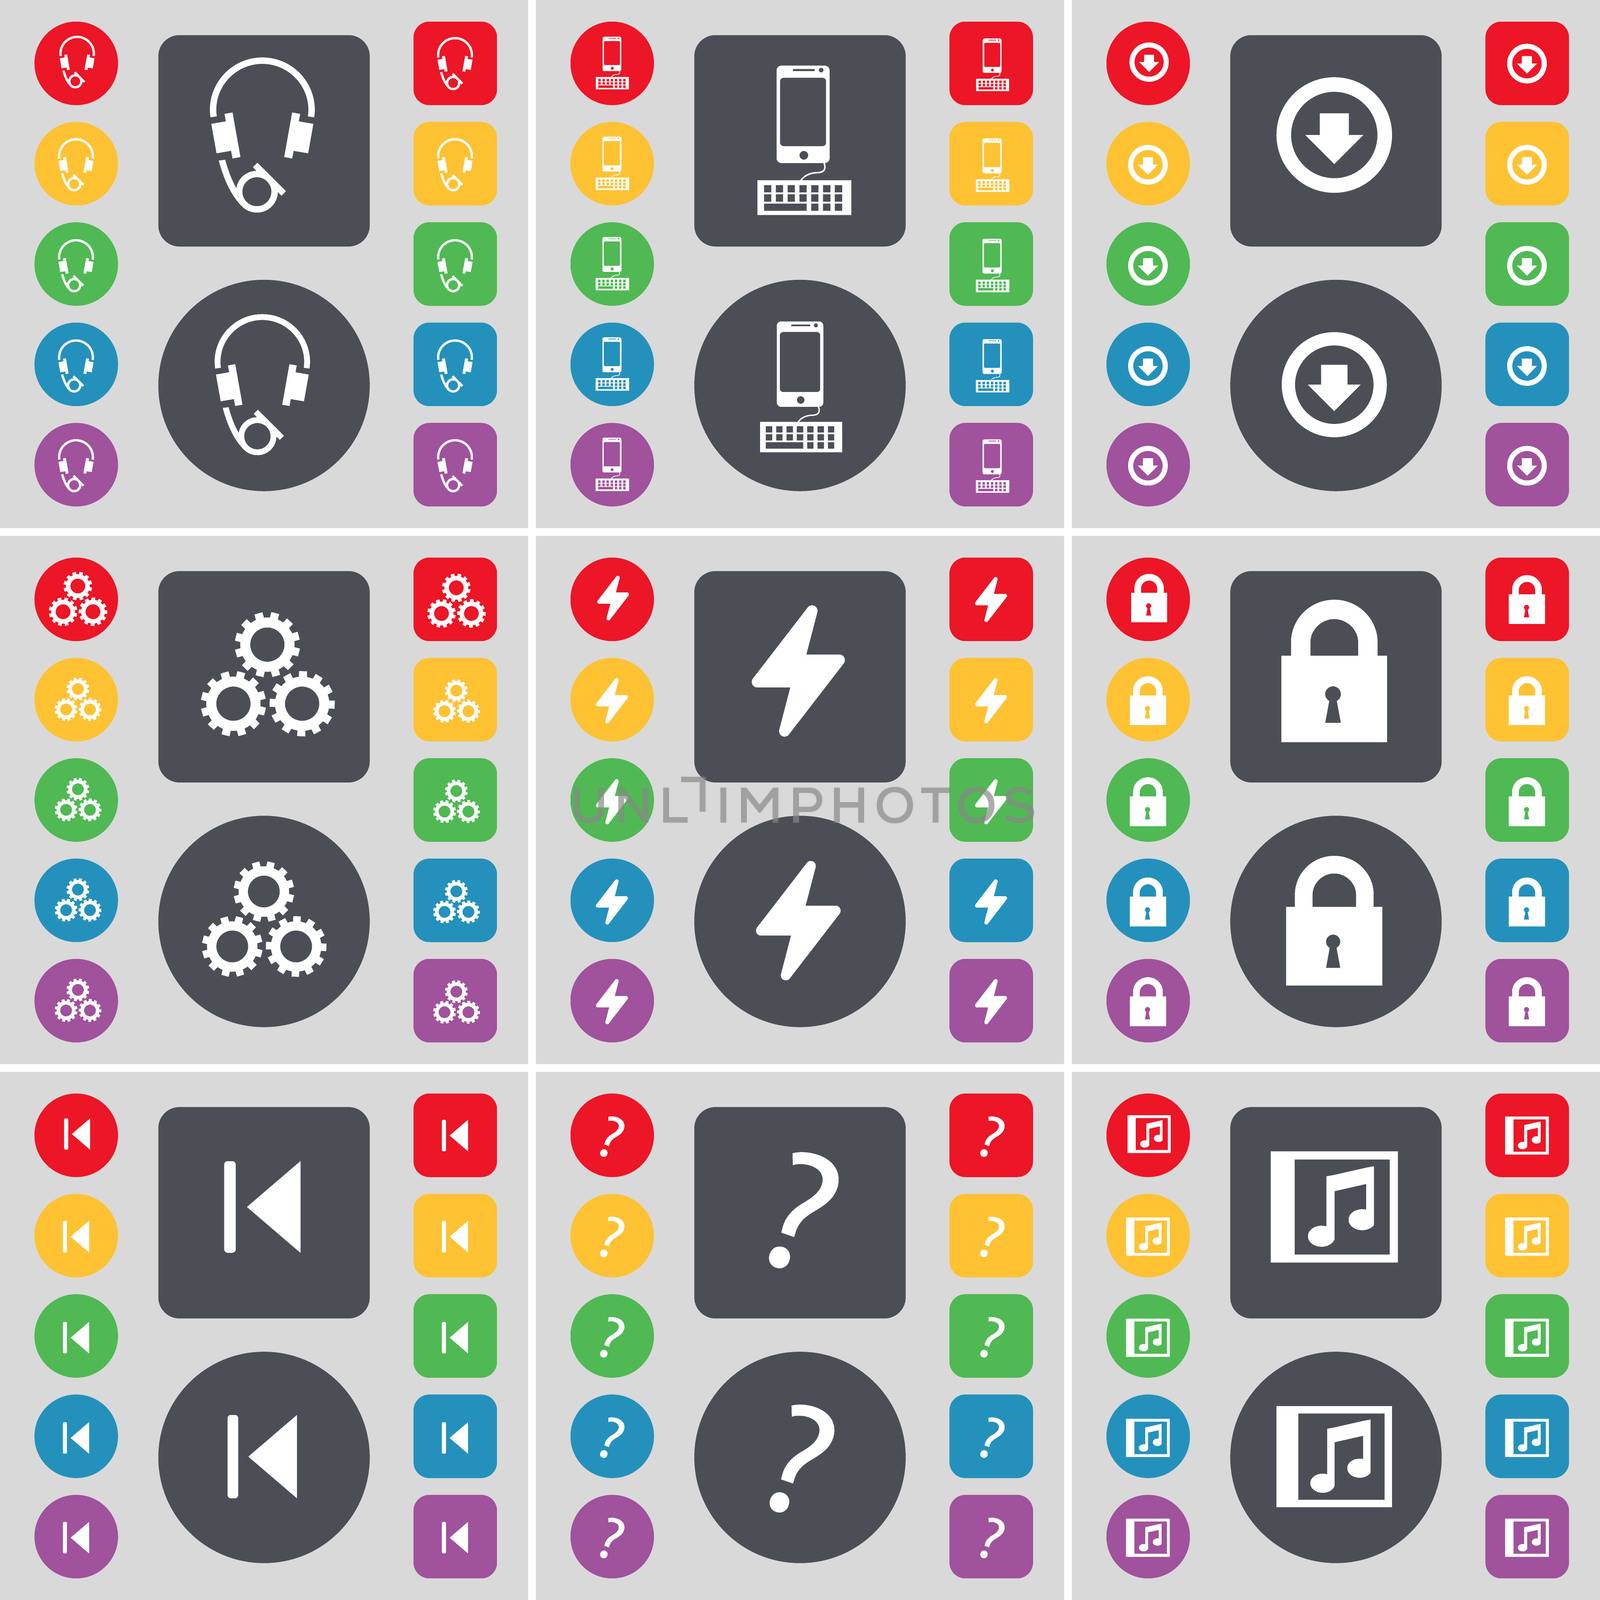 Headphones, Smartphone, Arrow down, Gear, Flash, Lock, Media skip, Question mark, Music window icon symbol. A large set of flat, colored buttons for your design. illustration